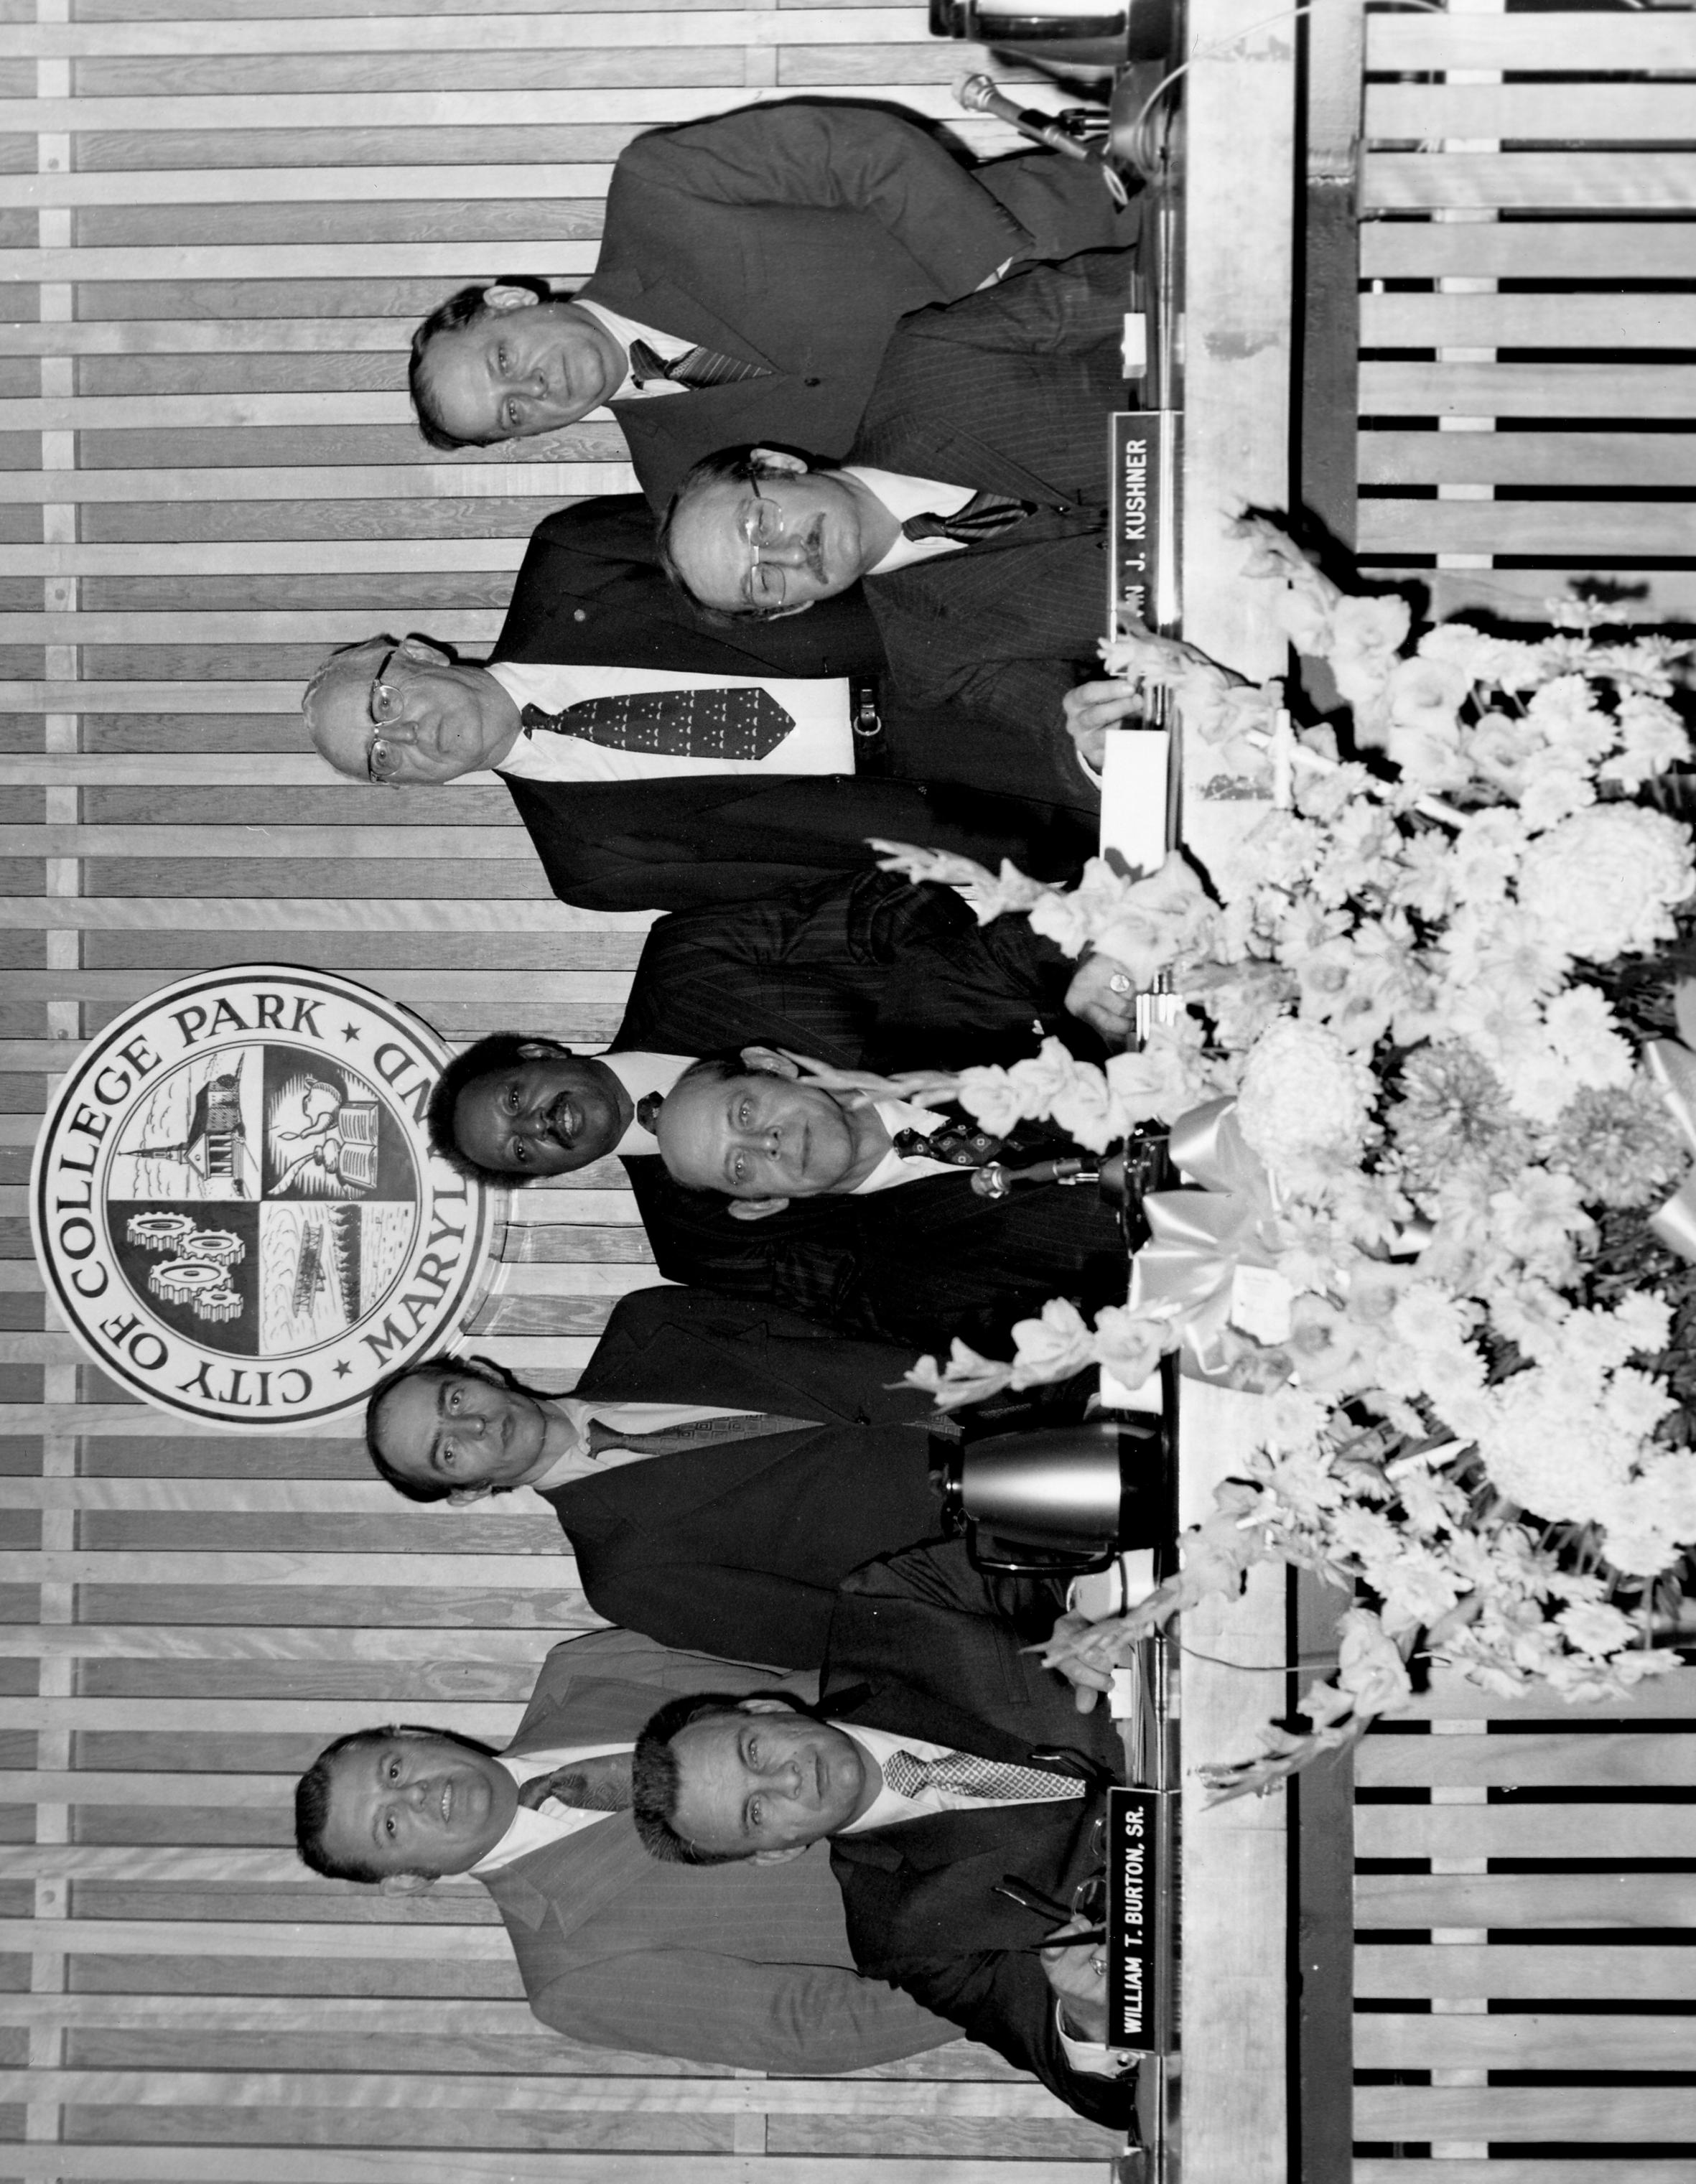 Mayor and Council;